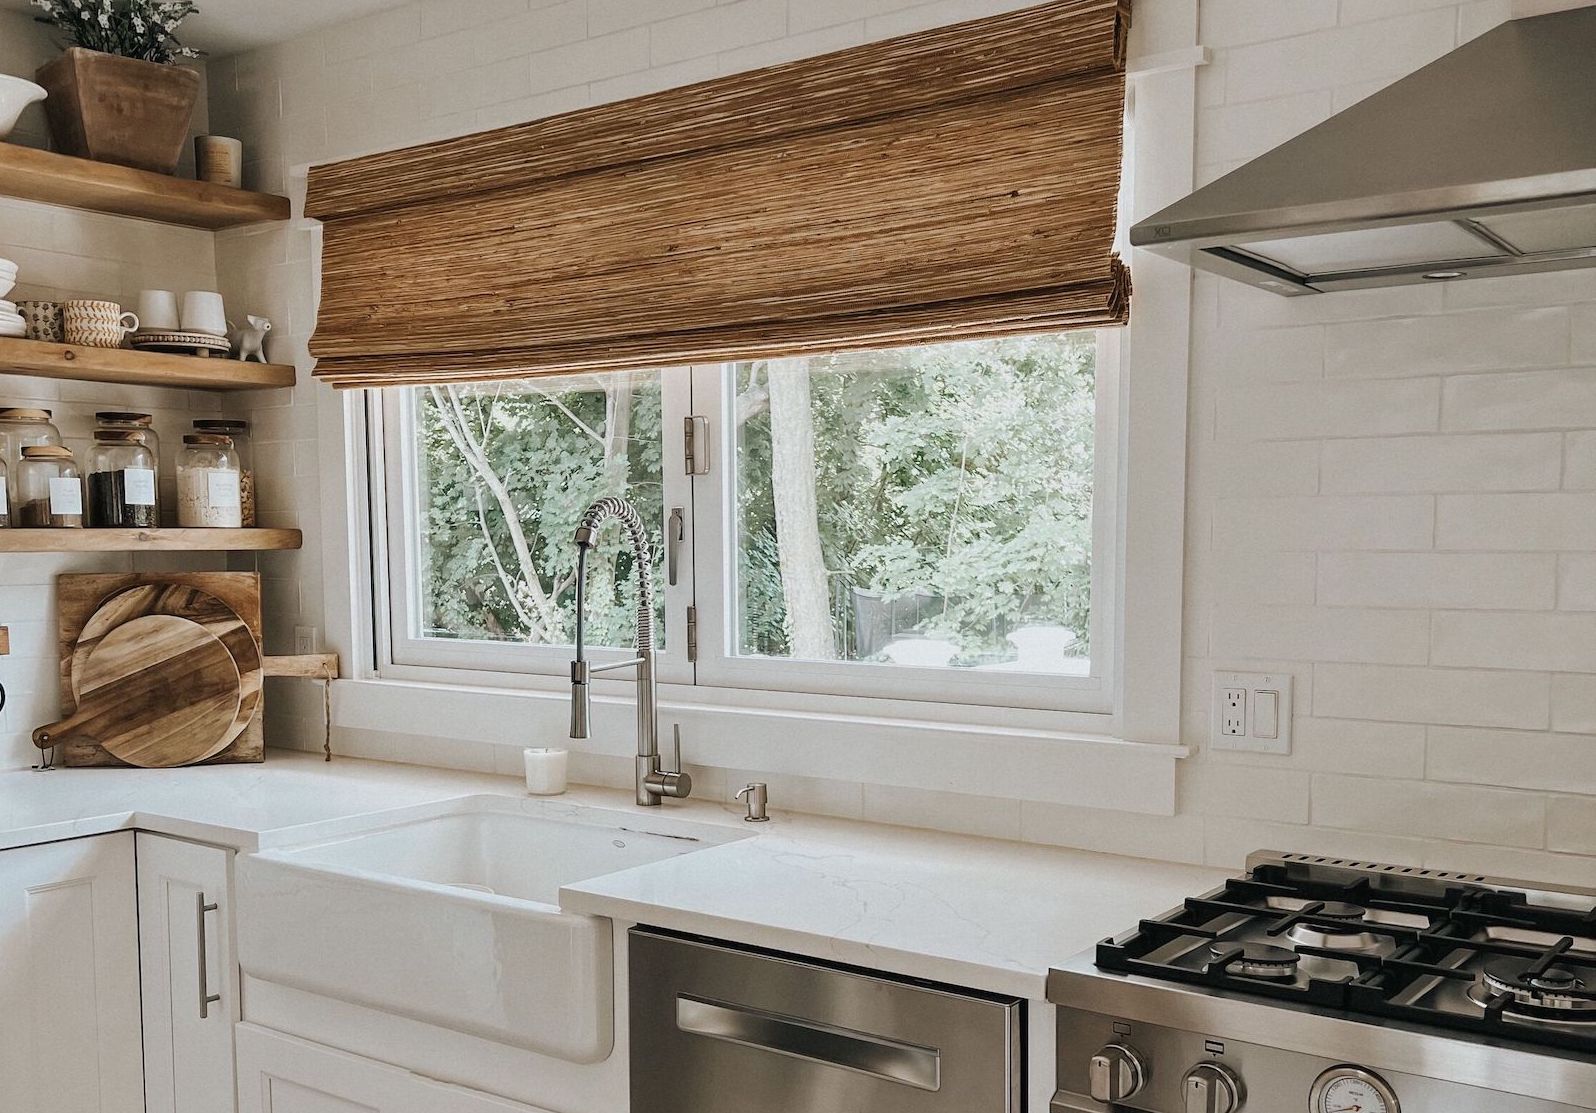 Woven wood shades cover a large kitchen window